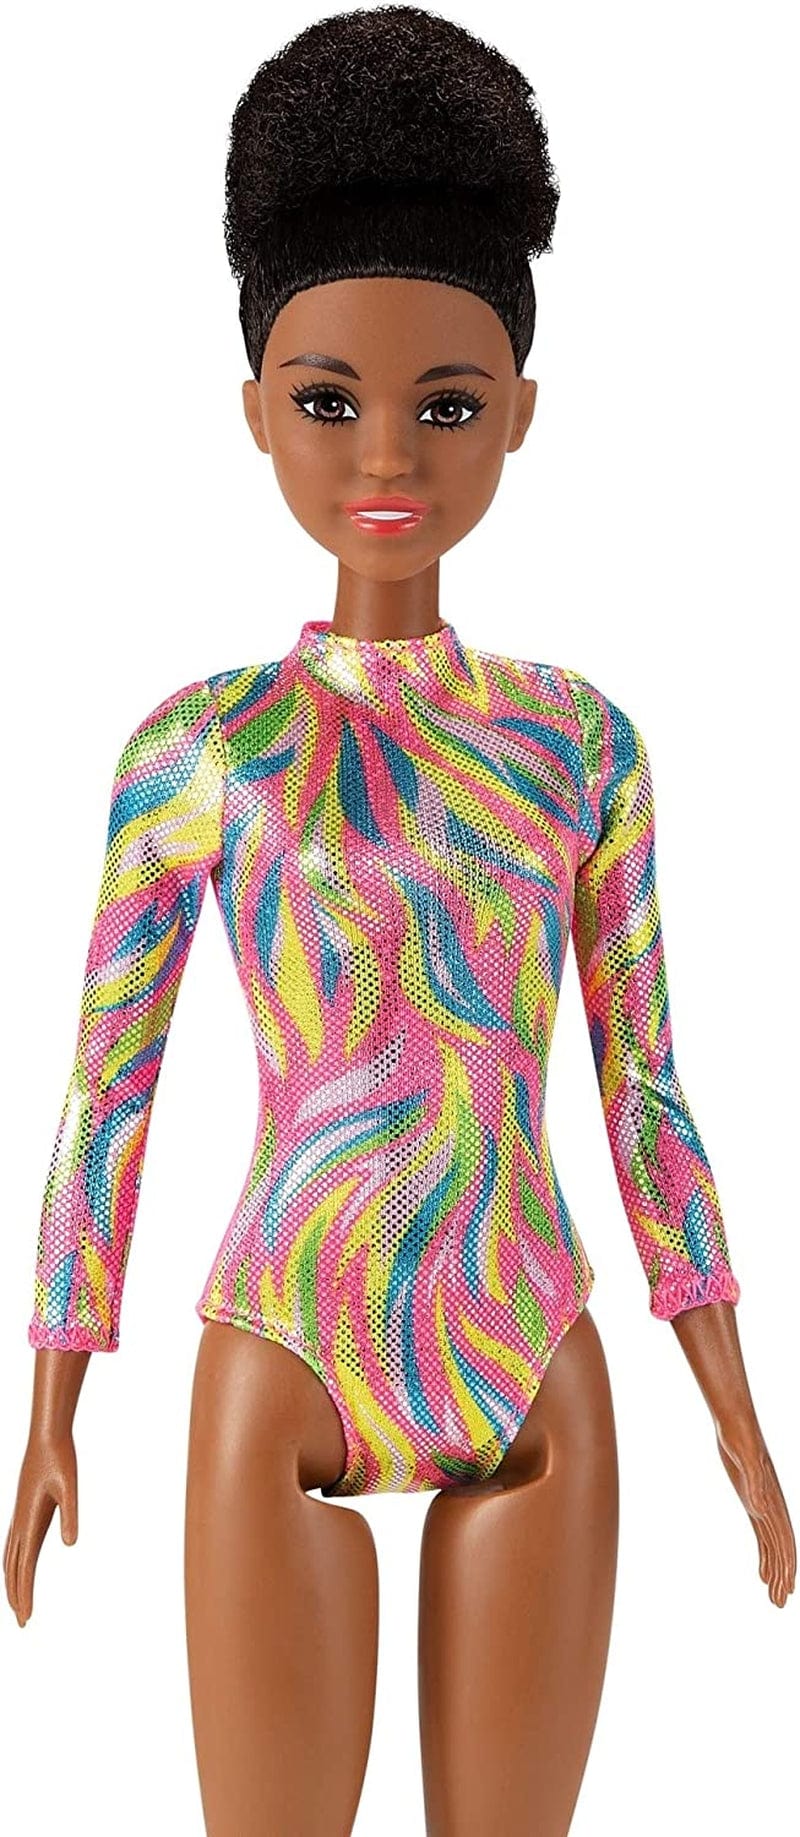 Barbie Rhythmic Gymnast Brunette Doll (12-In) with Colorful Metallic Leotard, 2 Clubs & Ribbon Accessory, Great Gift for Ages 3 Years Old & Up Sporting Goods > Outdoor Recreation > Winter Sports & Activities Mattel   